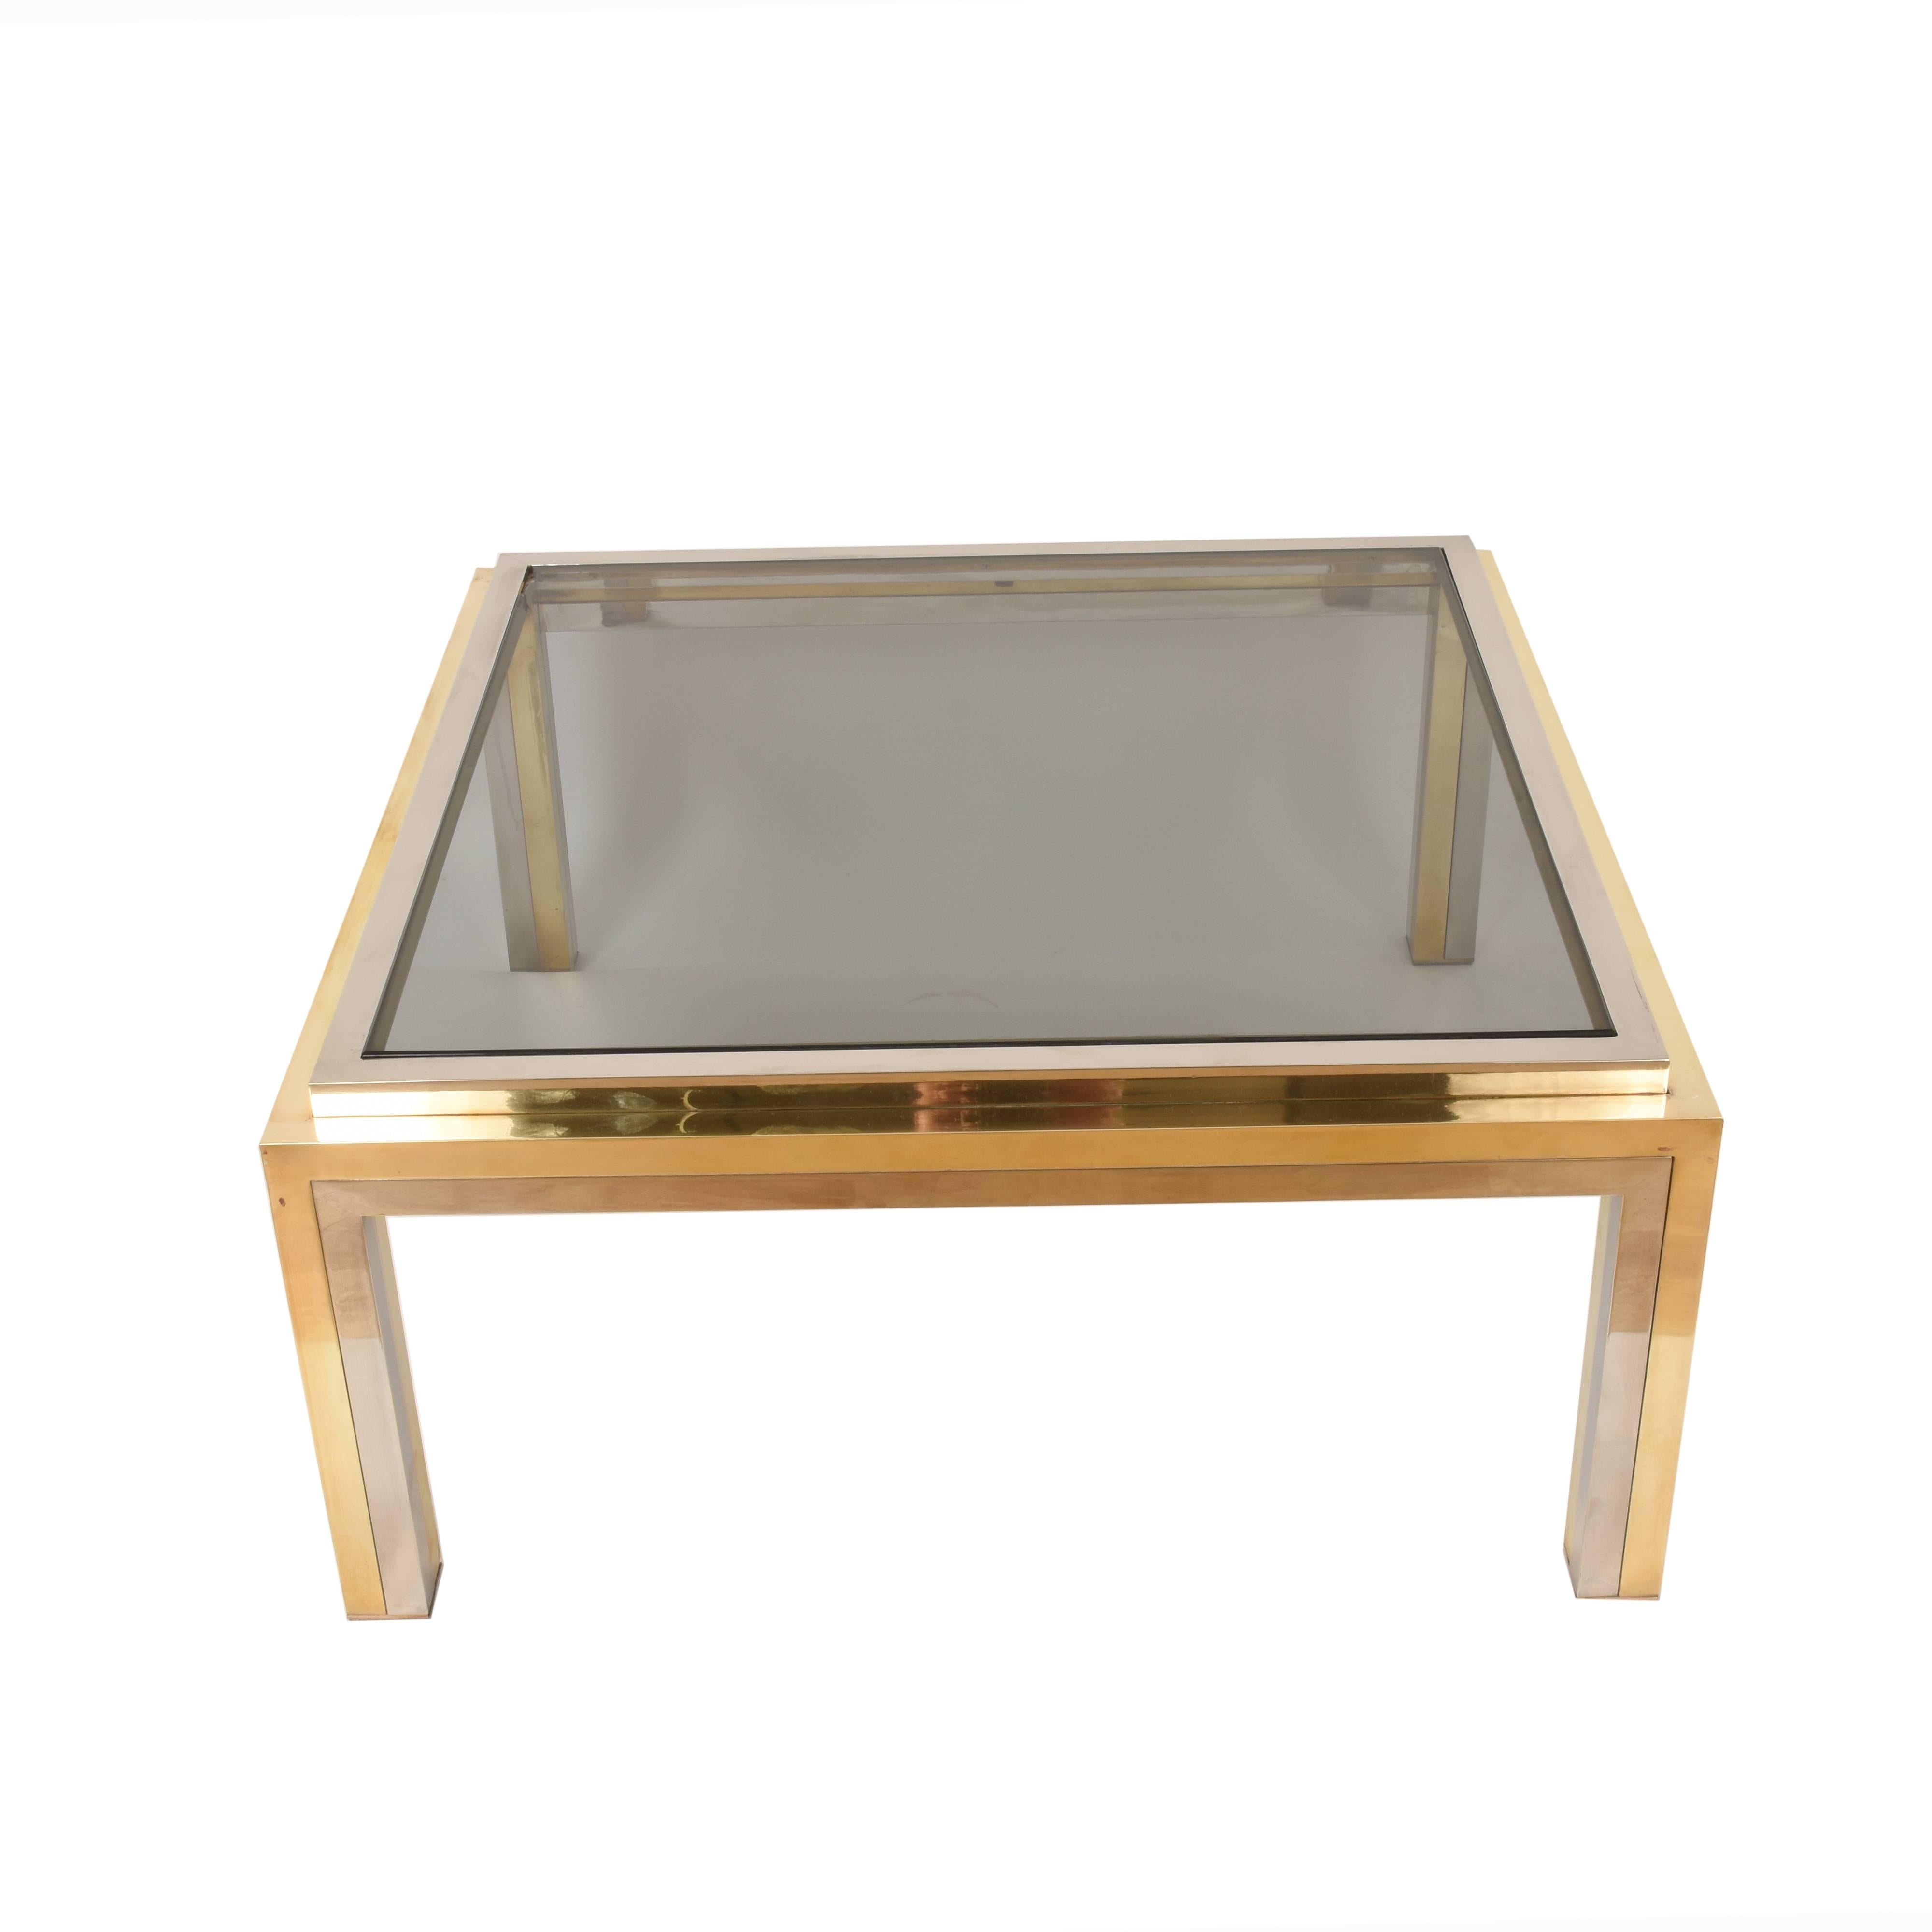 Elegant coffee table in chromed metal and brass, smoked glass adds to the seductive elegance of this midcentury piece.
Measurements: 80 x 80 H 40.